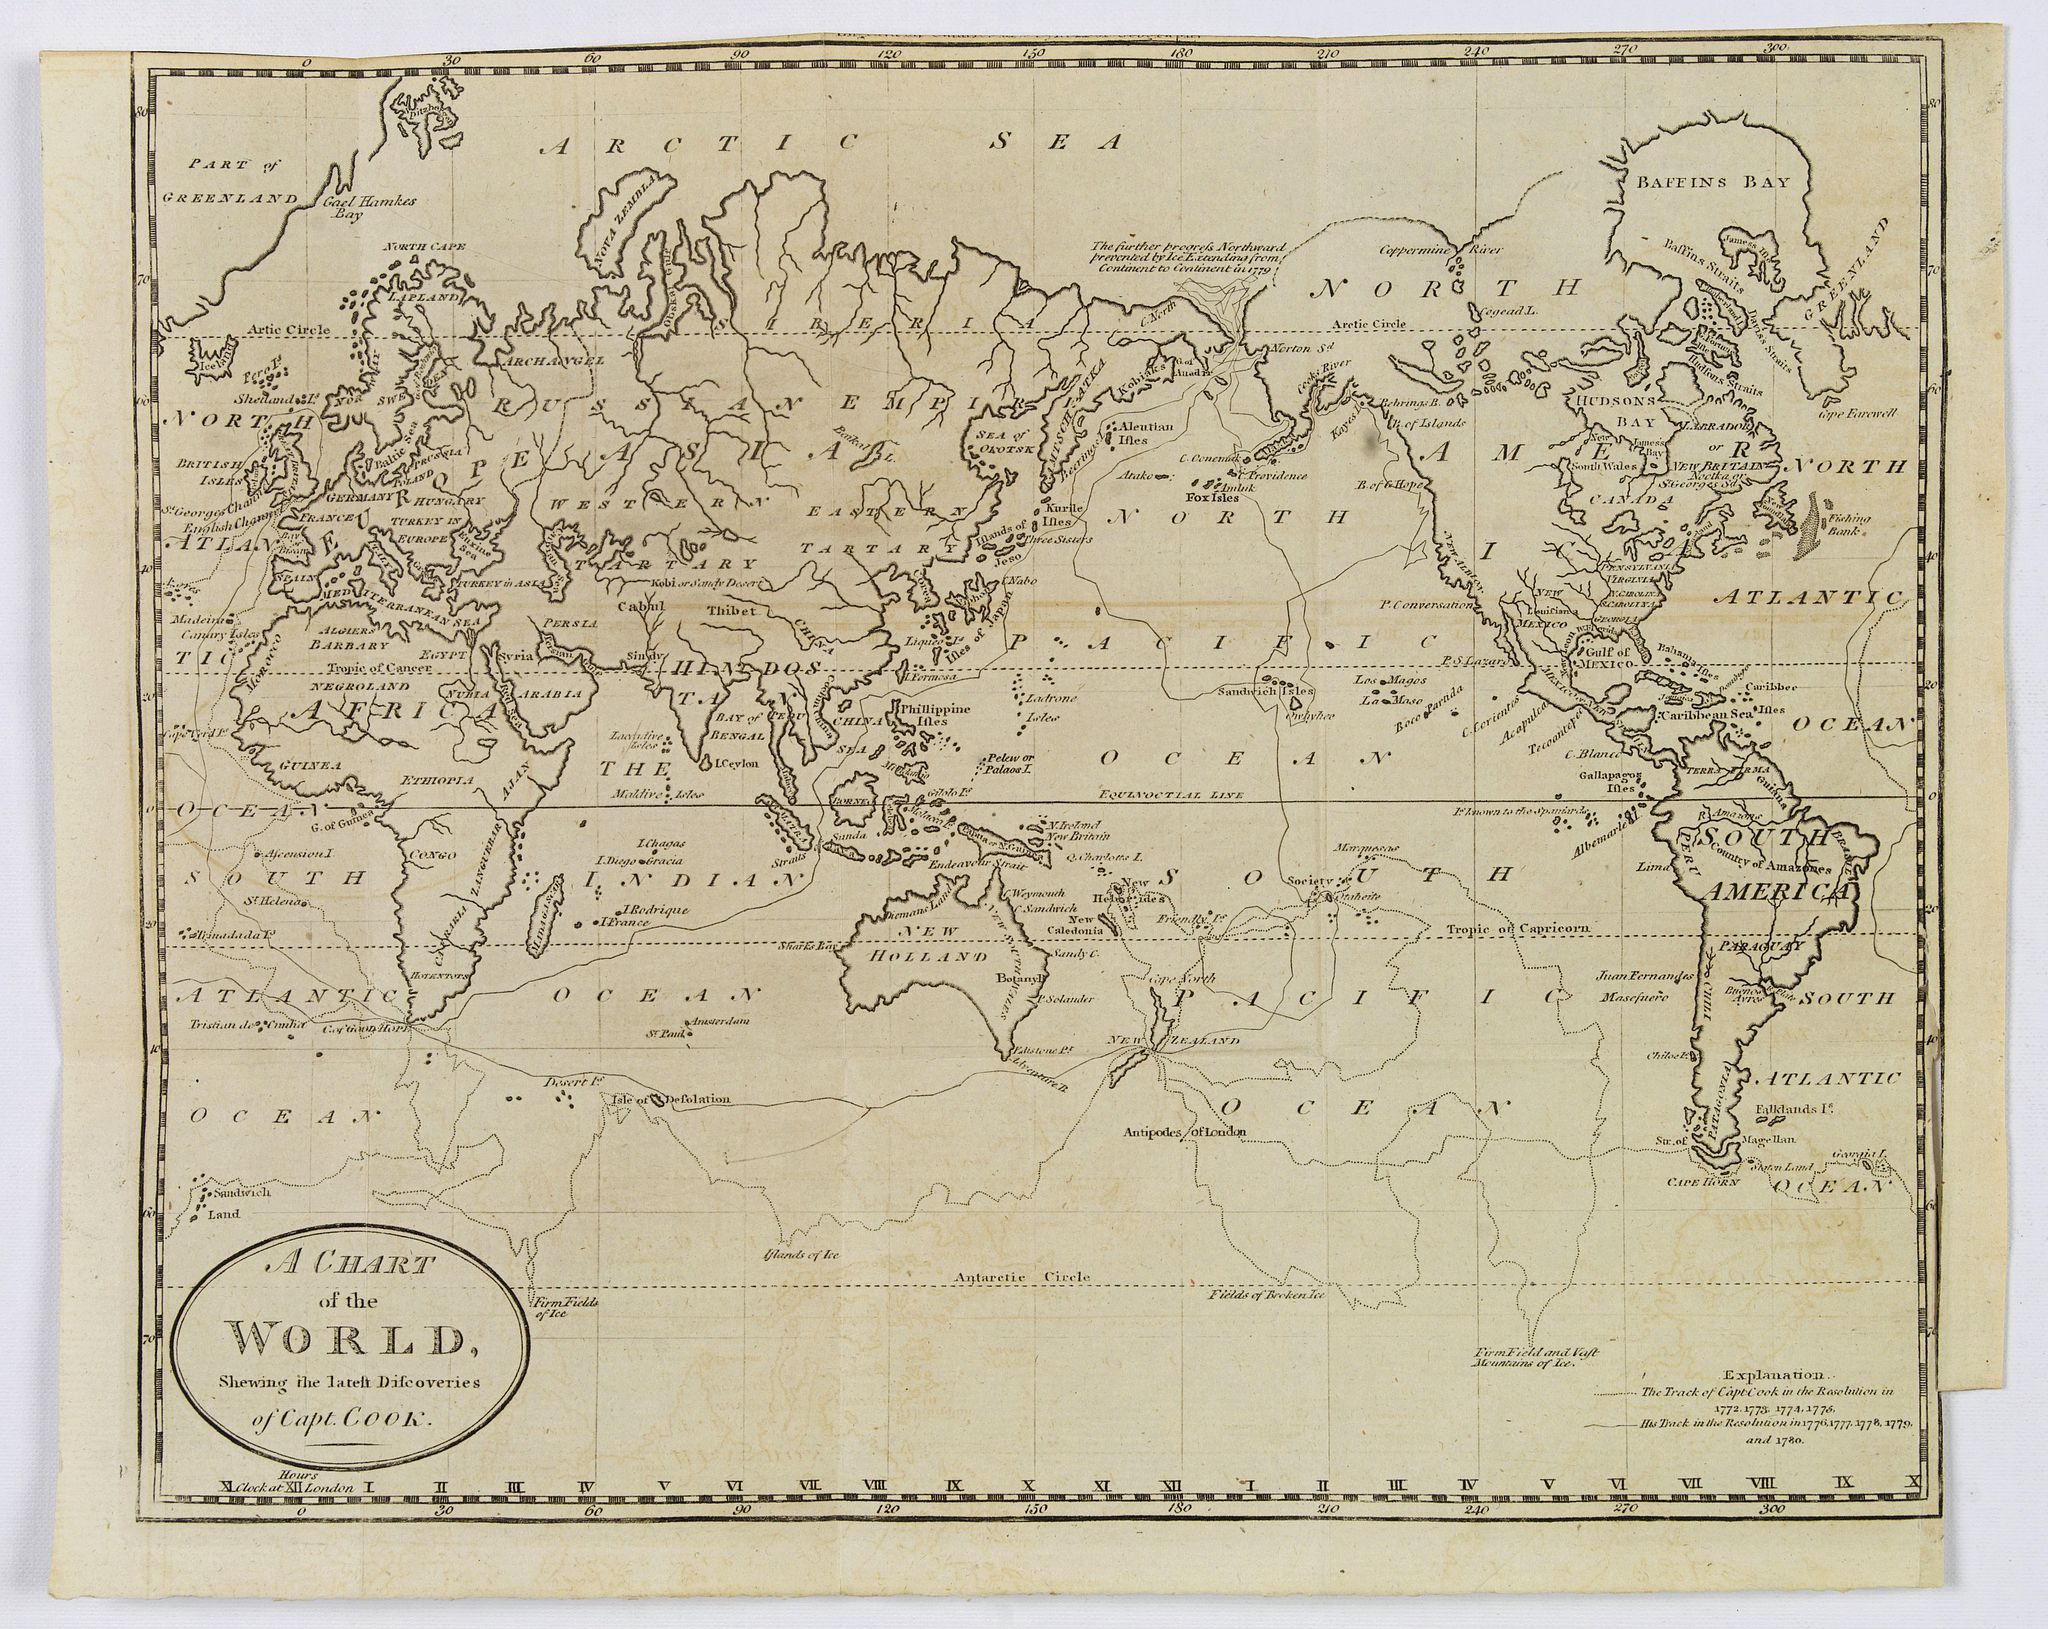 A Chart of the World, shewing the Latest Discoveries of Capt. Cook